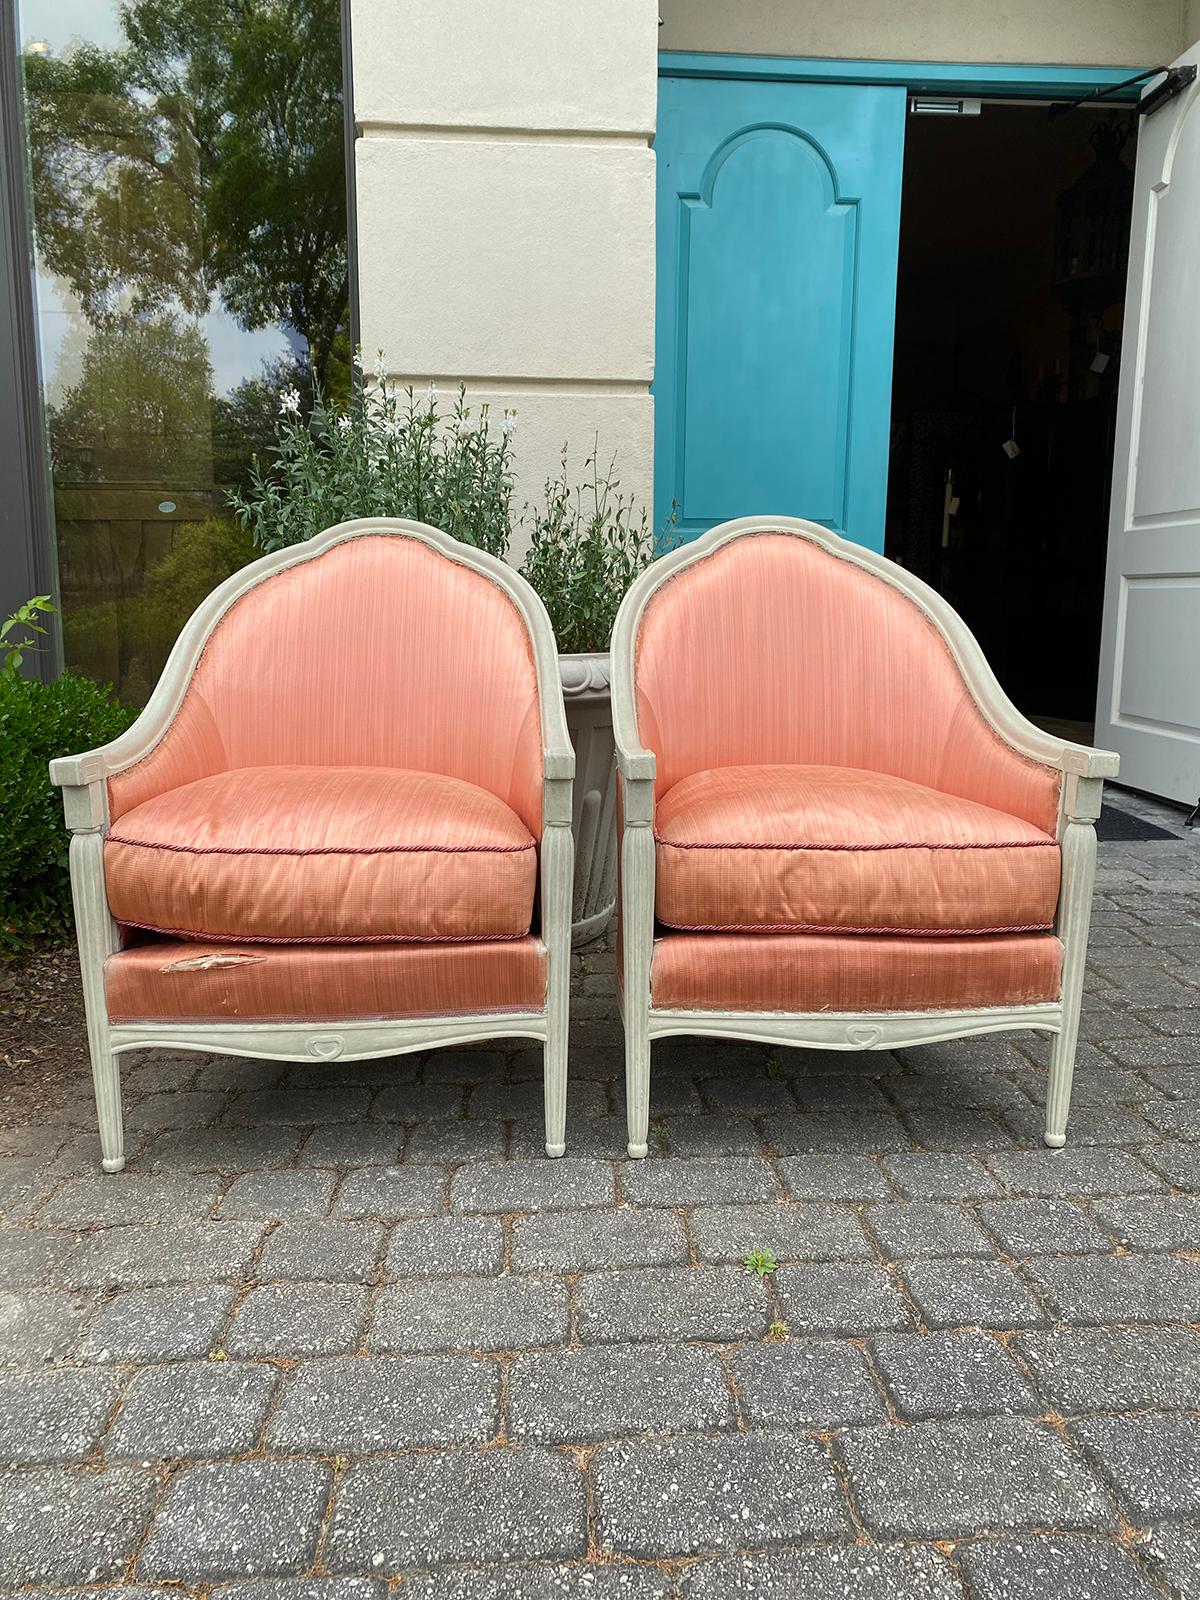 Pair of 20th century deco style French upholstered armchairs / Barrel chairs, hand painted a custom finish
Measures: Arm height: 21.25